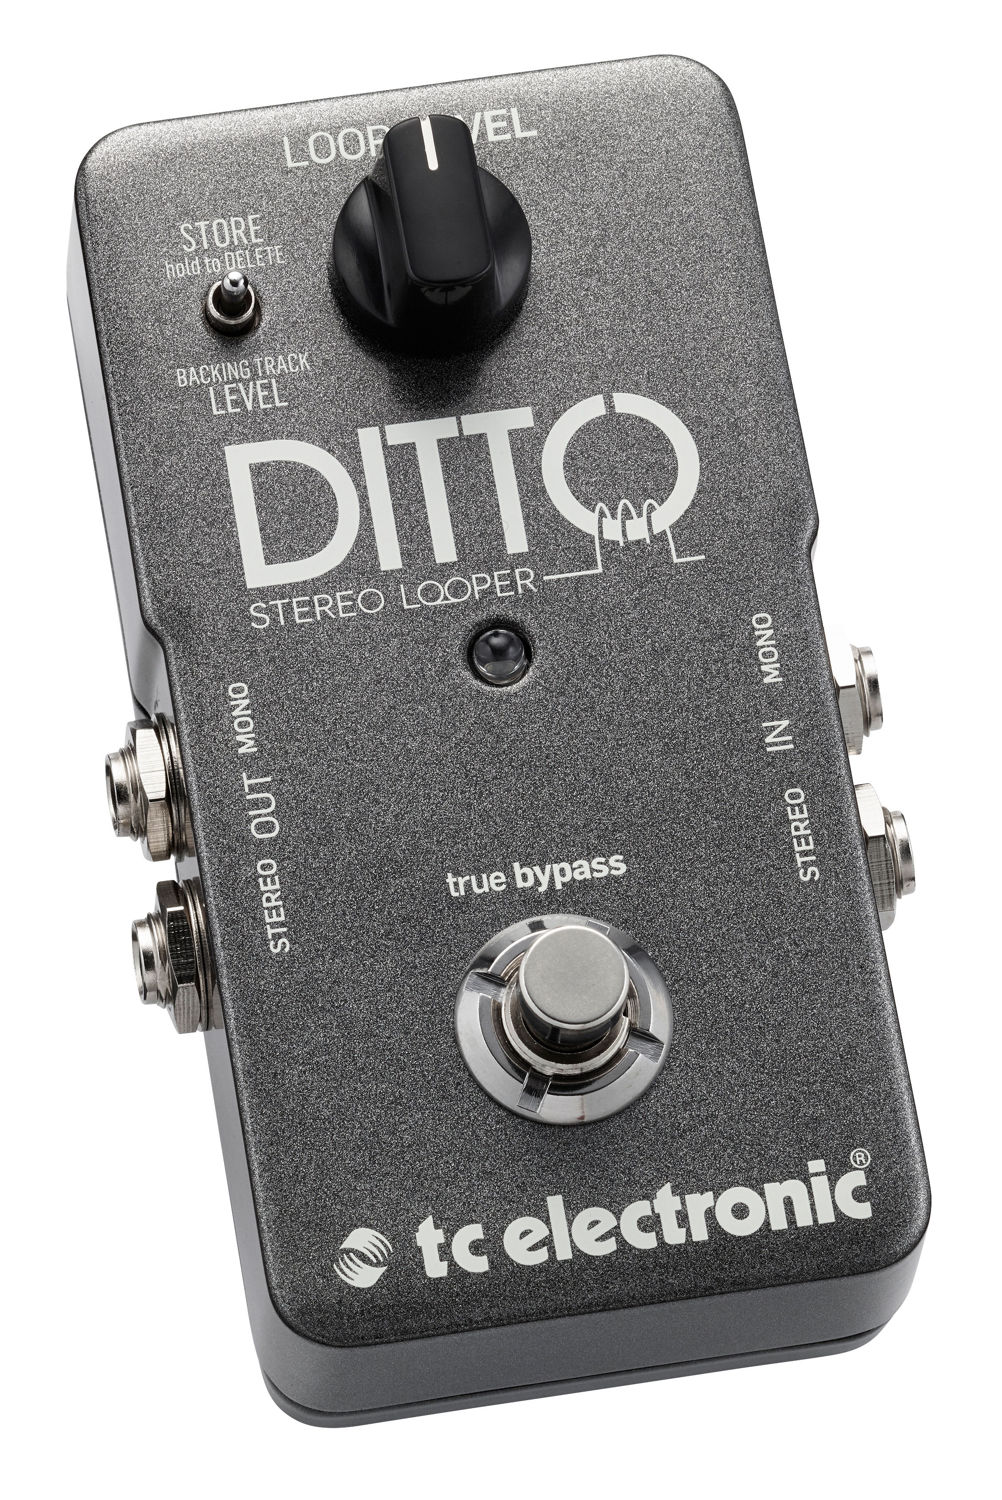 tc electronic　DITTO STEREO LOOPER　ルーパー